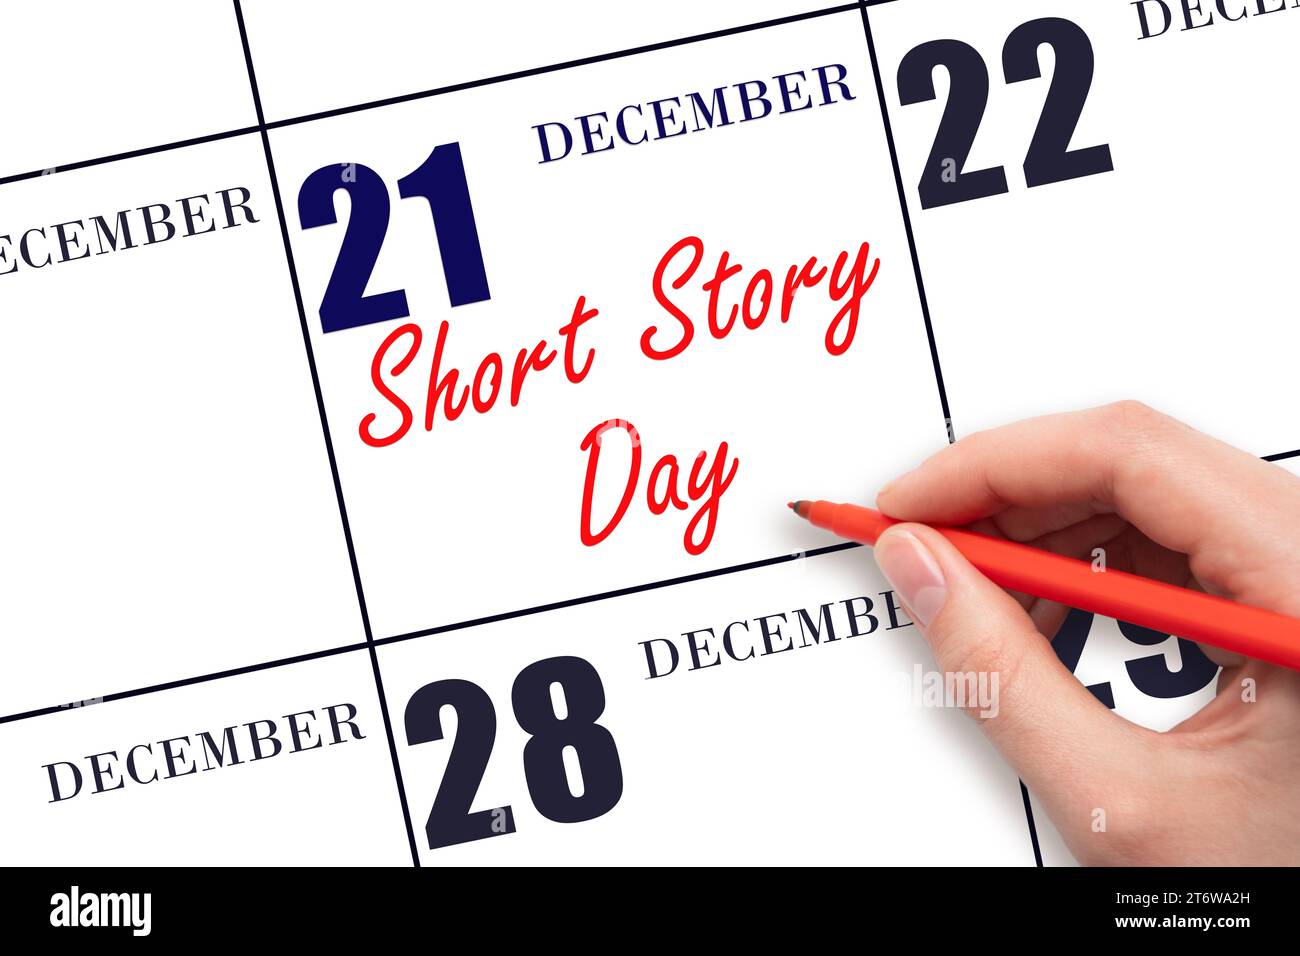 December 21. Hand writing text Short Story Day on calendar date. Save the date. Holiday. Day of the year concept. Stock Photo